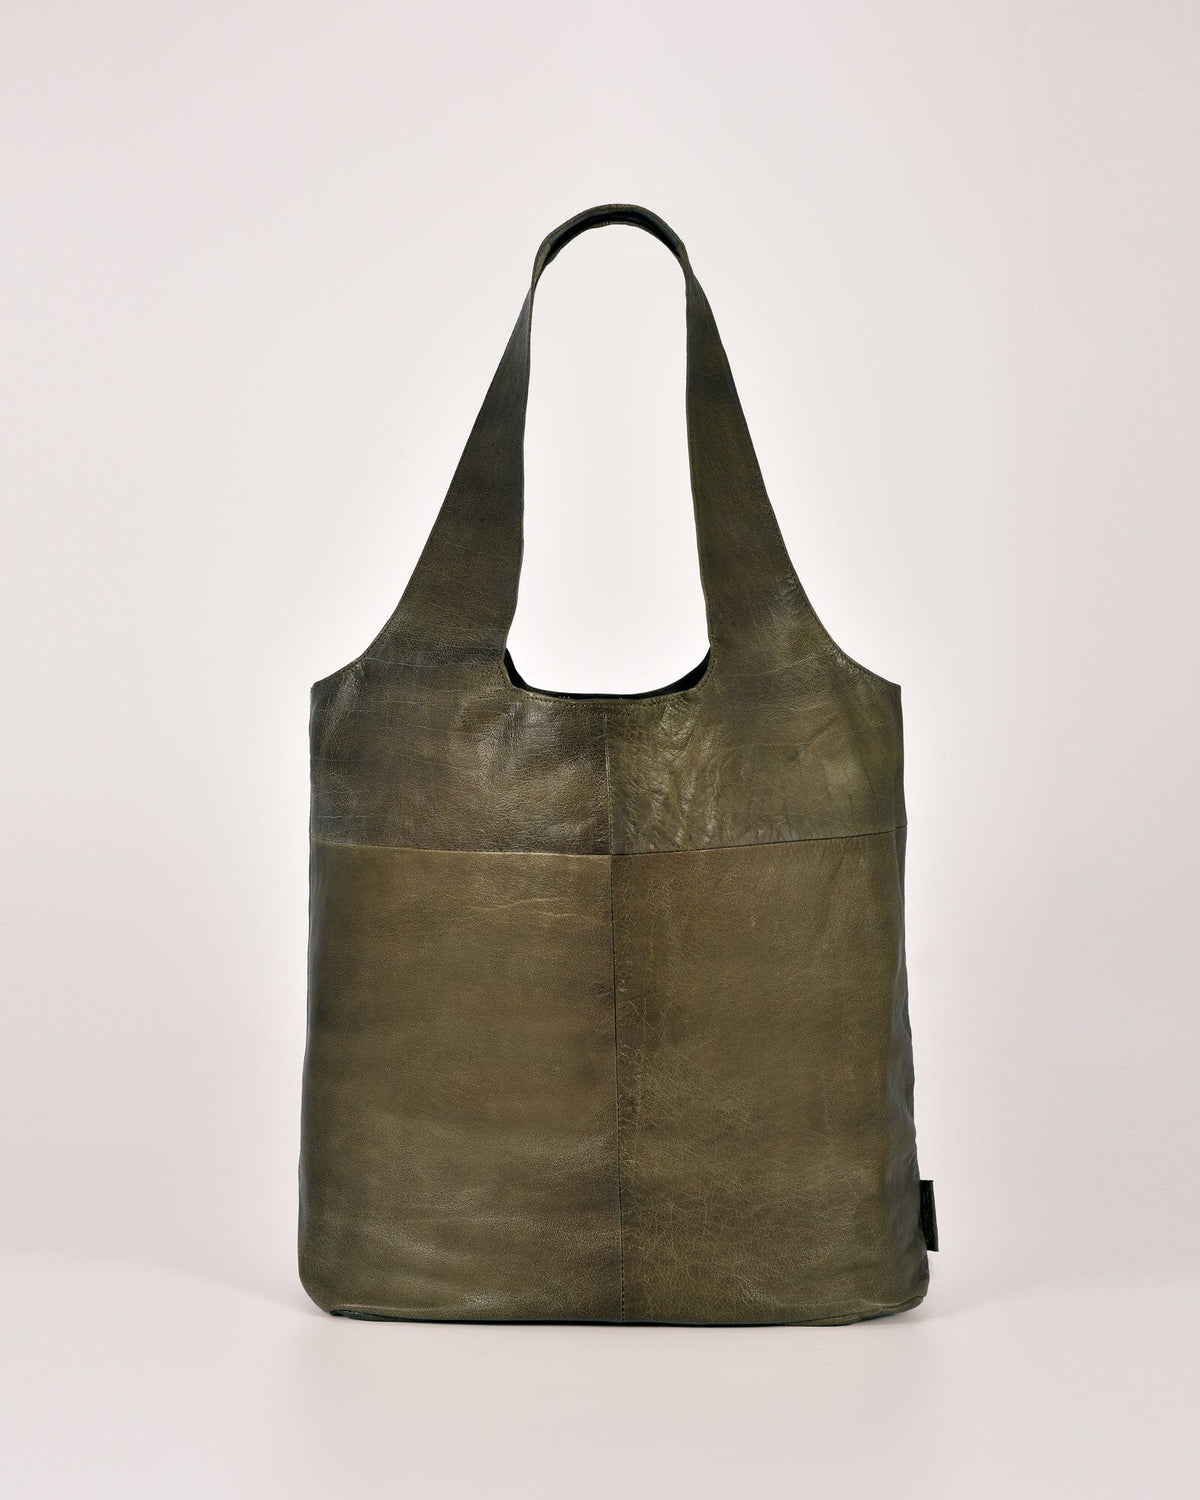 Emerald Large Leather Tote